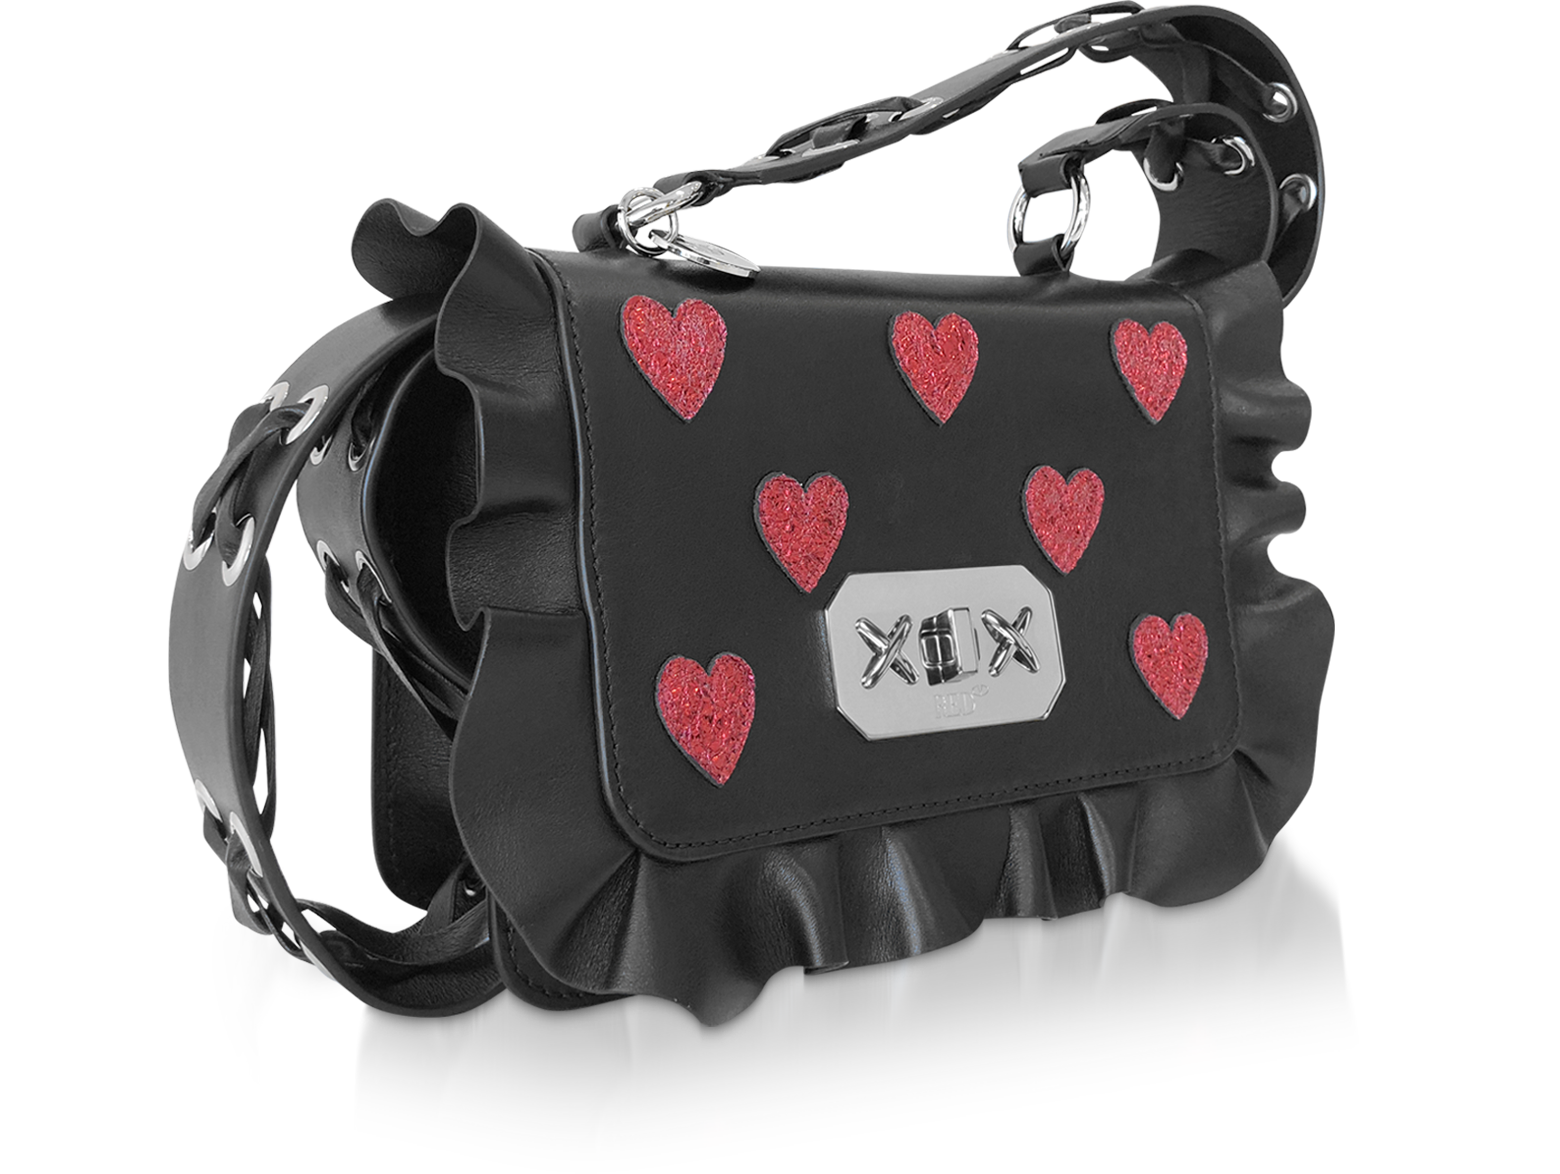 RED Valentino Red Heart Printed Leather Rock Ruffle Bag at